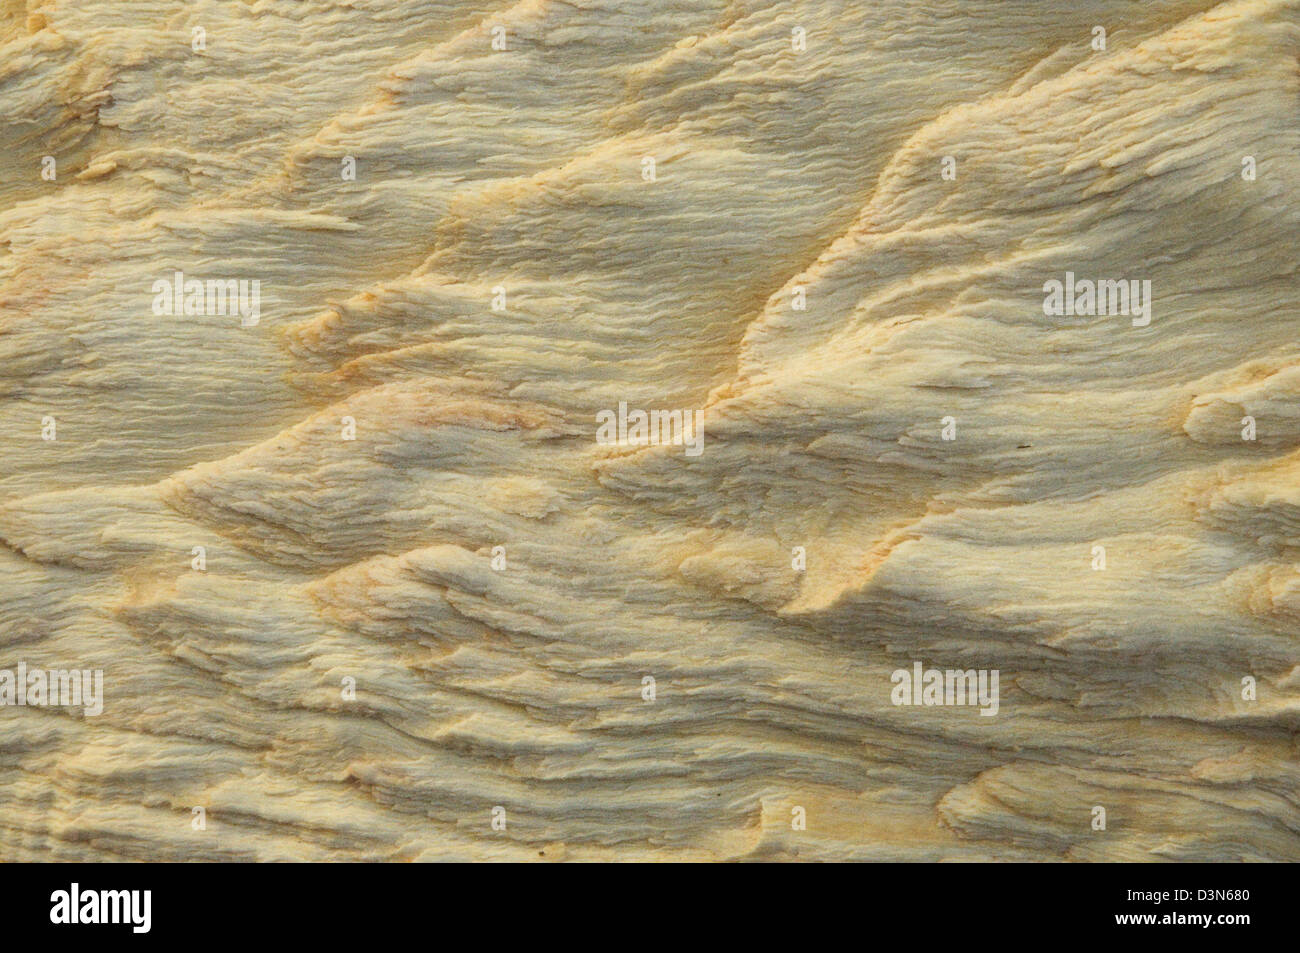 Closeup of damaged wood showing wooden grain and fiber Stock Photo